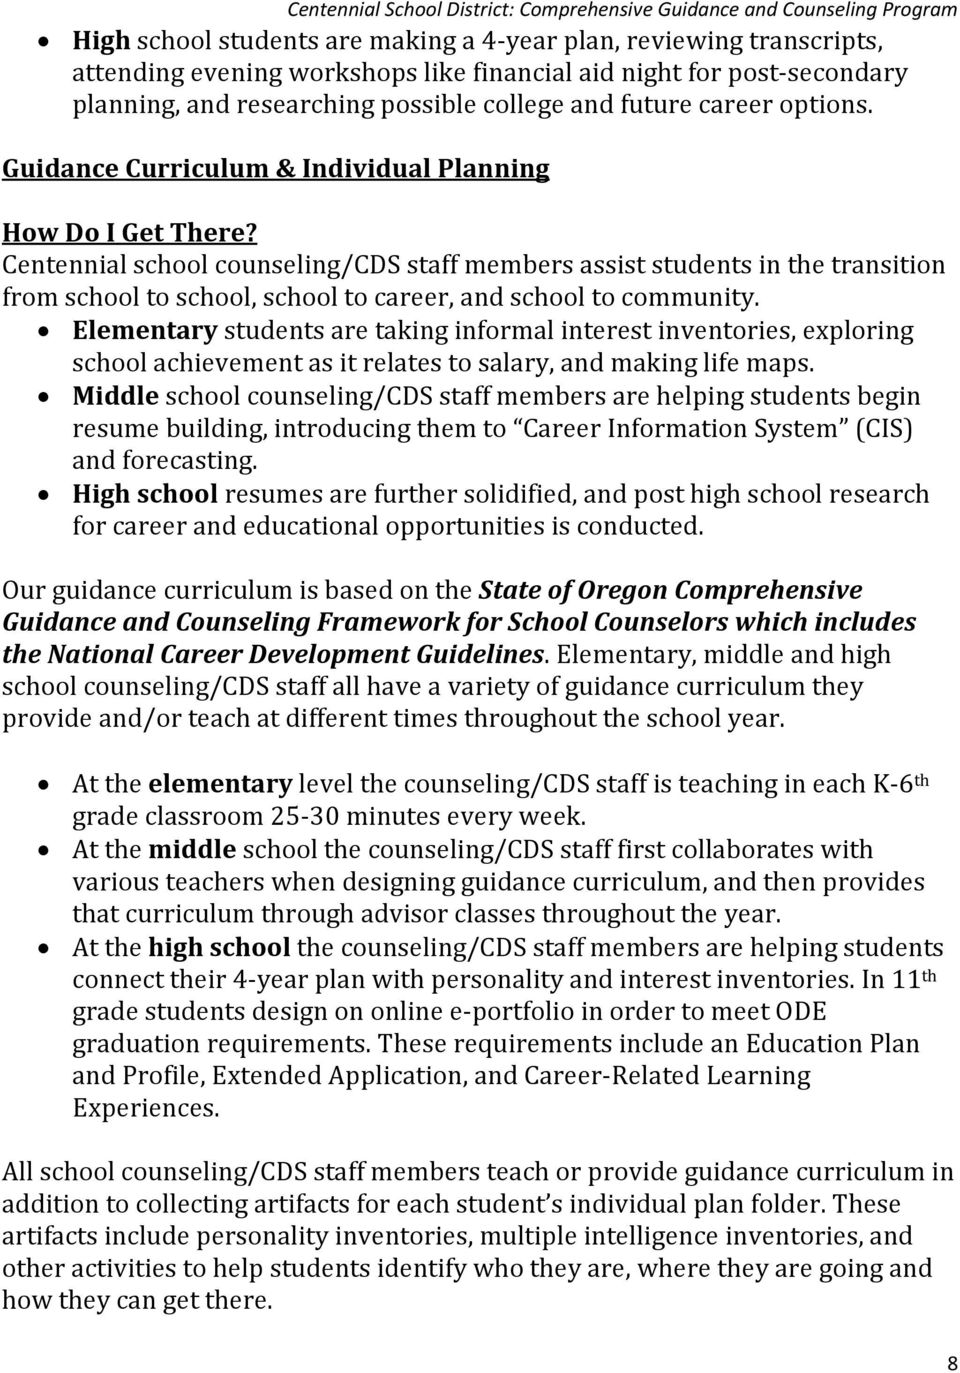 Centennial school counseling/cds staff members assist students in the transition from school to school, school to career, and school to community.